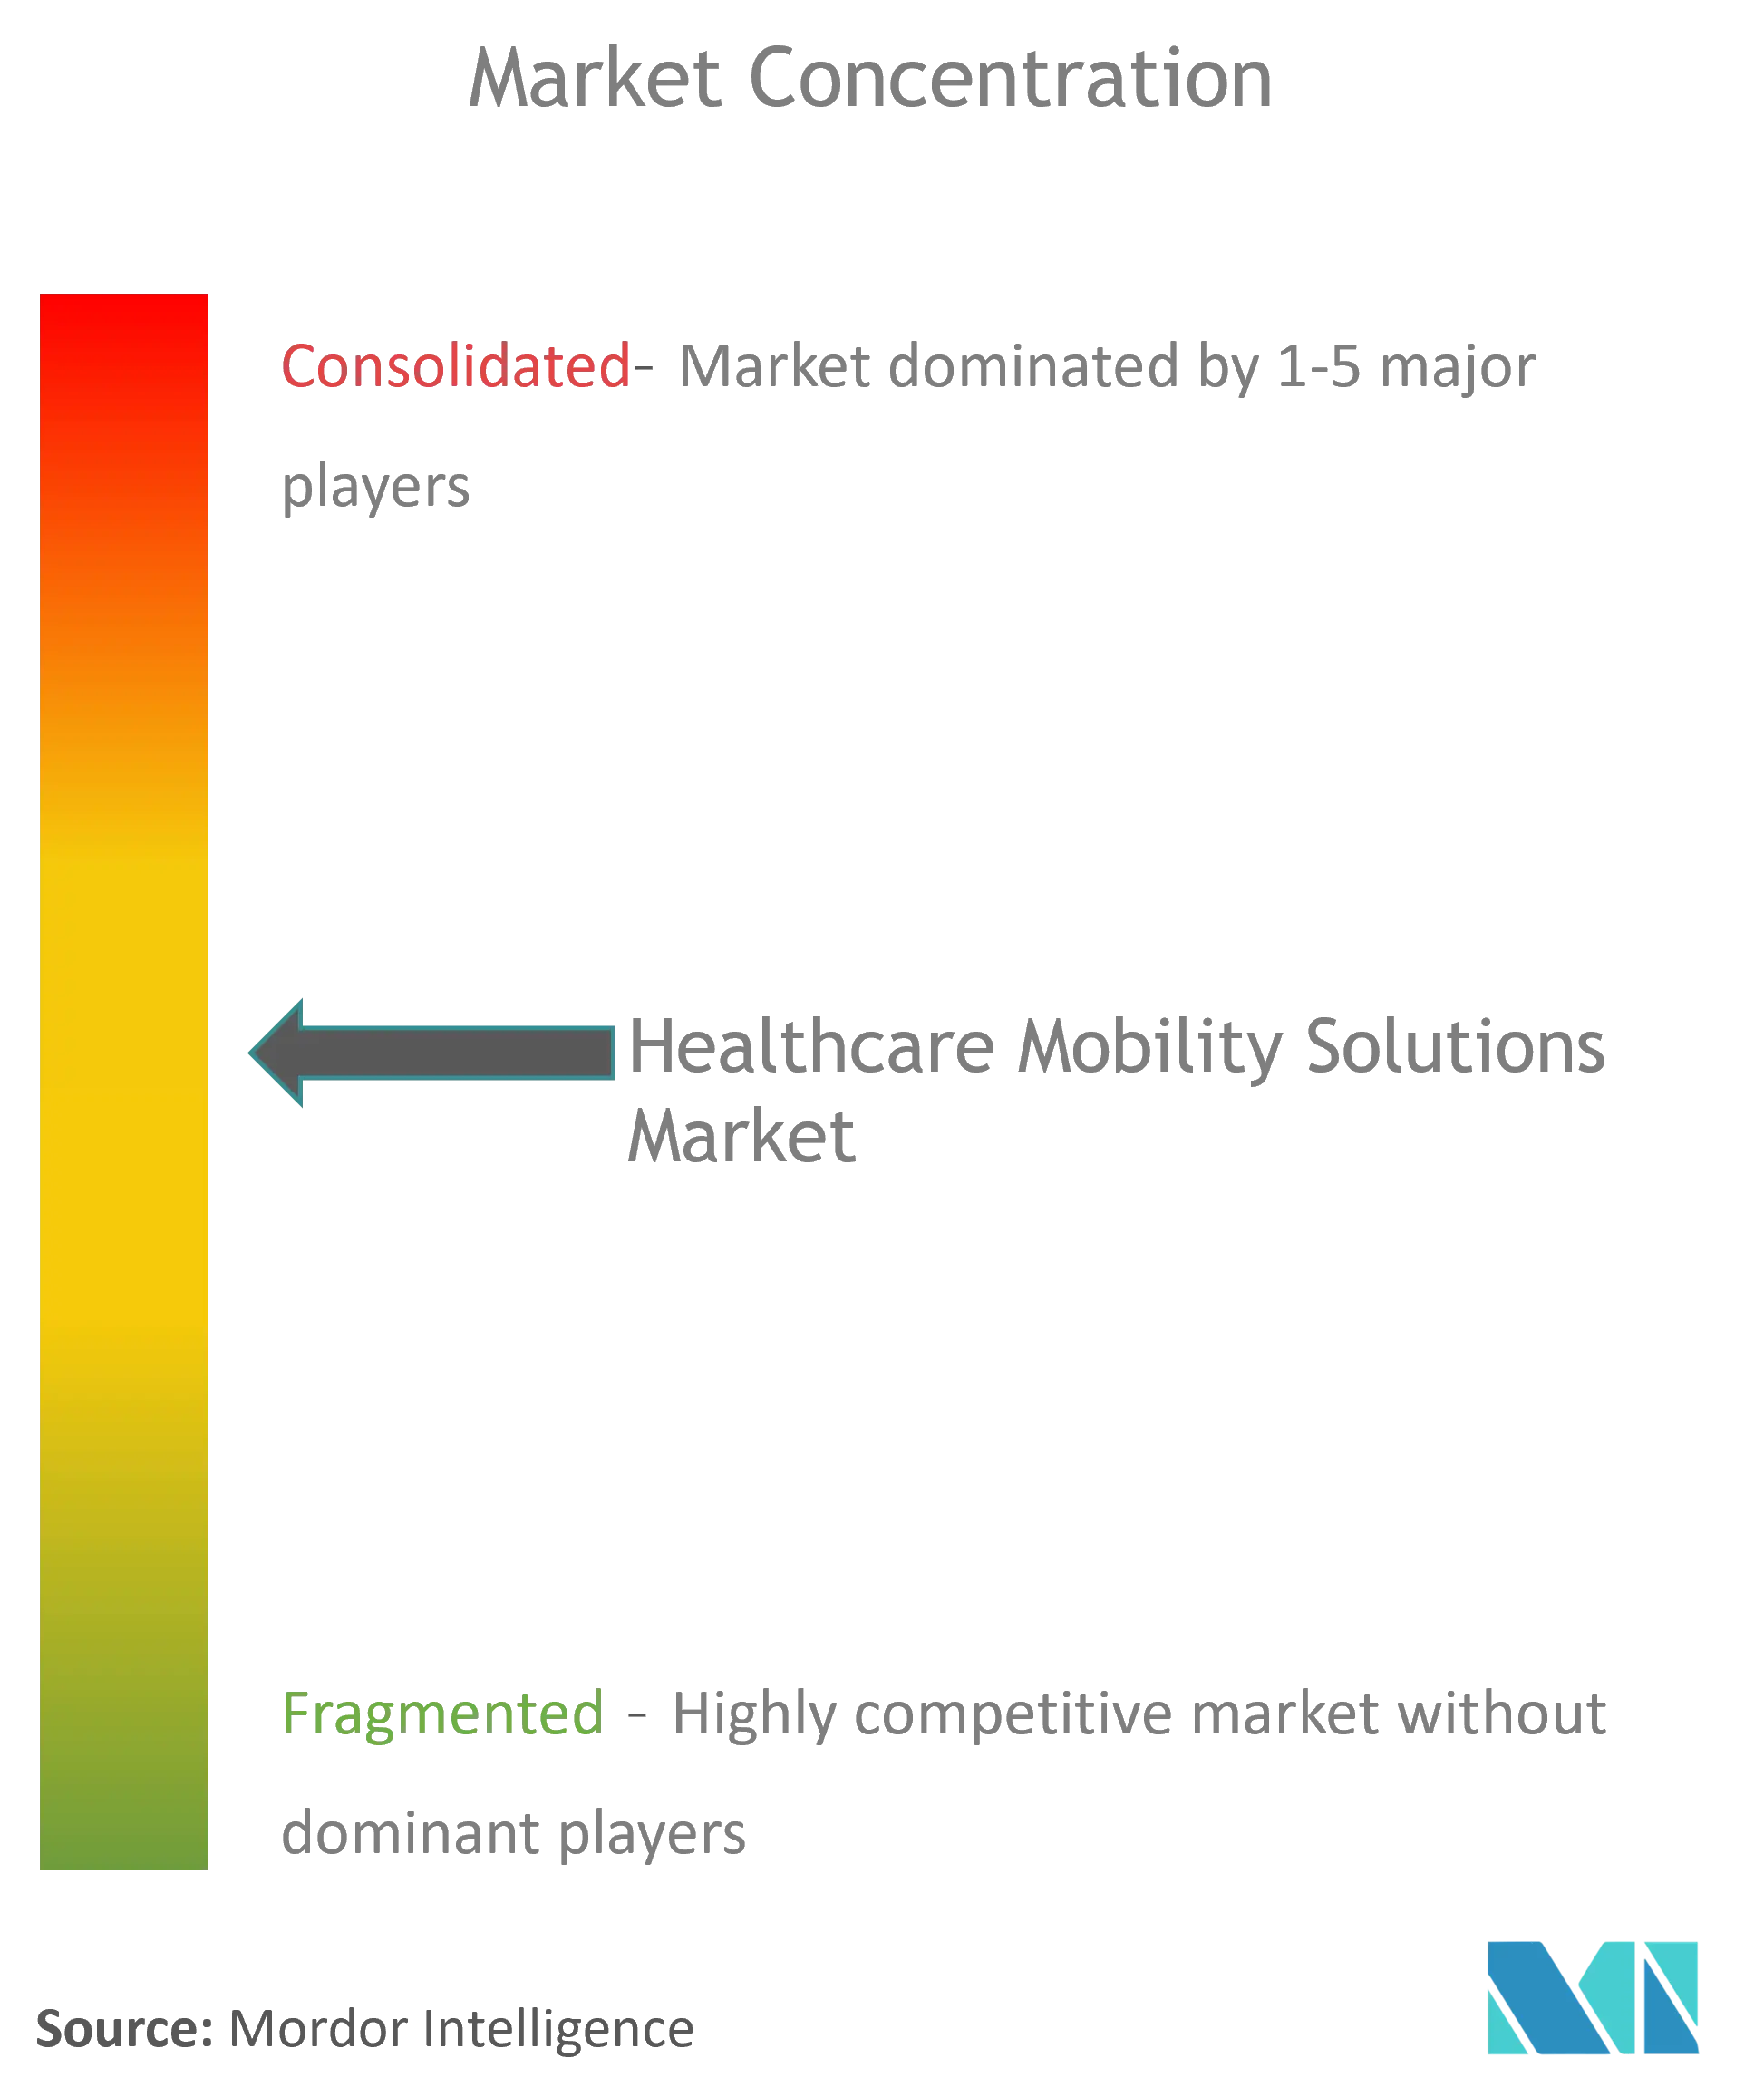 Healthcare Mobility Solutions Market Concentration